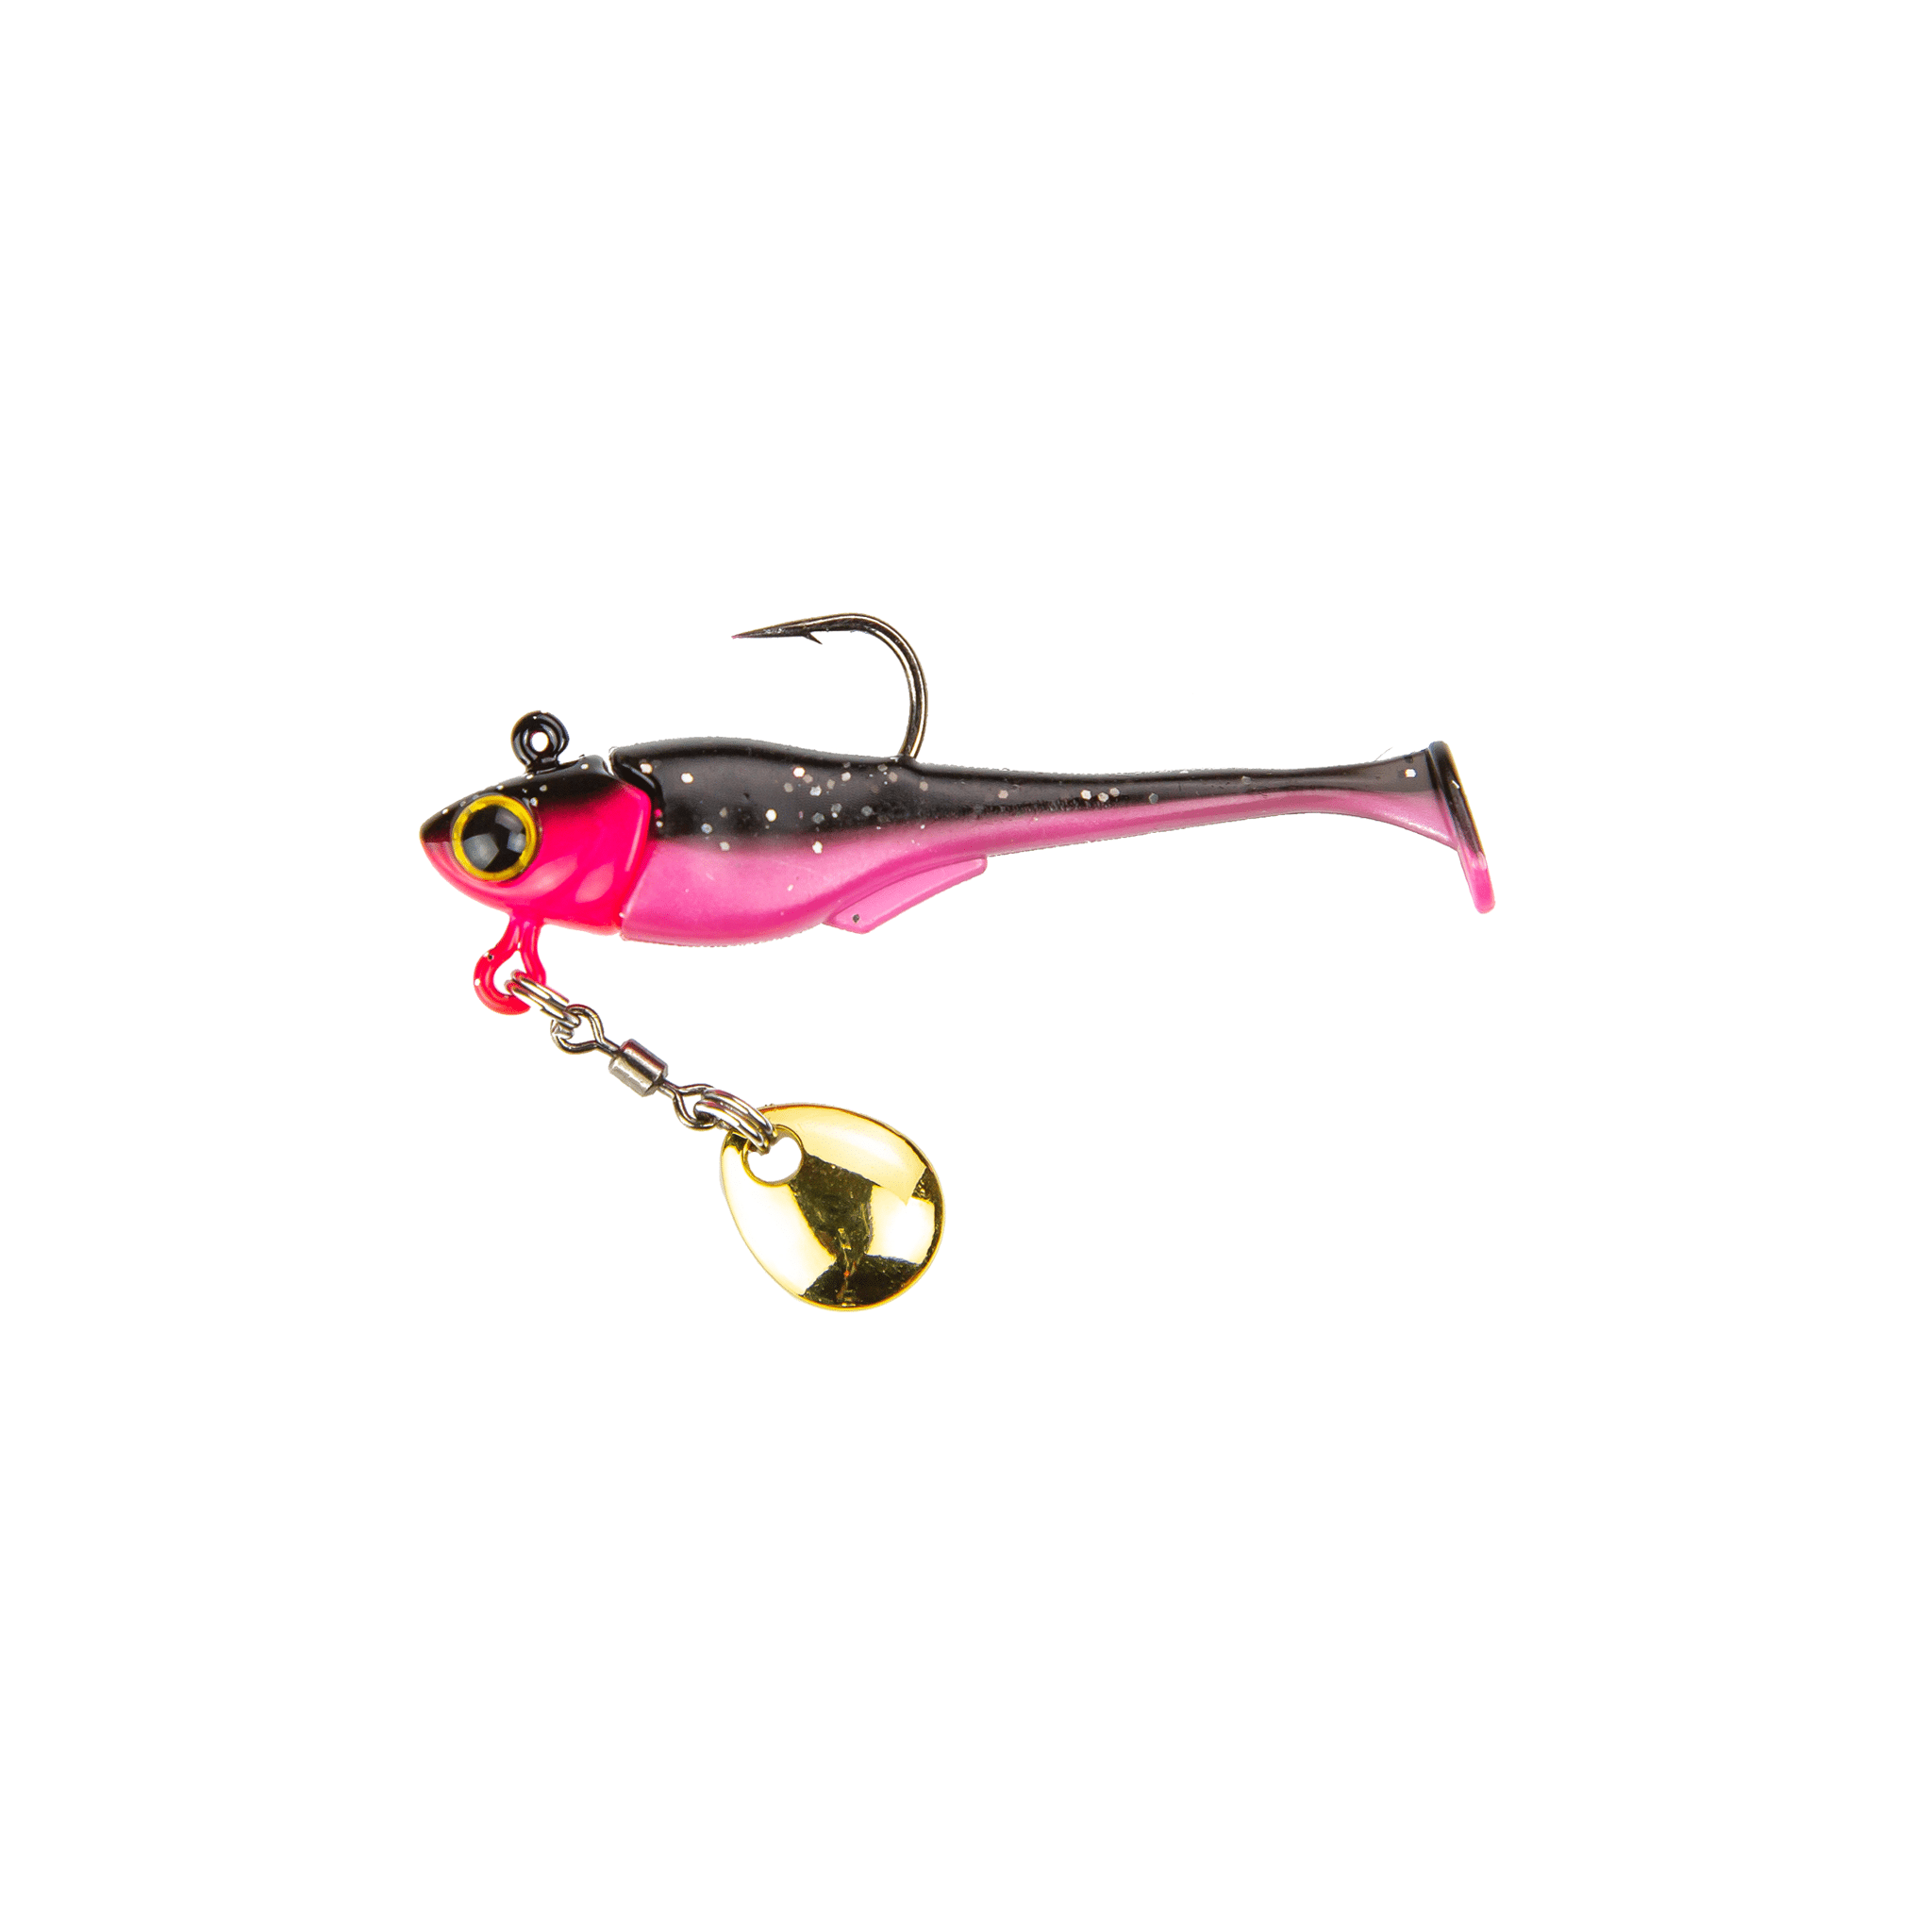 Underspins - Best Bass Fishing Lures